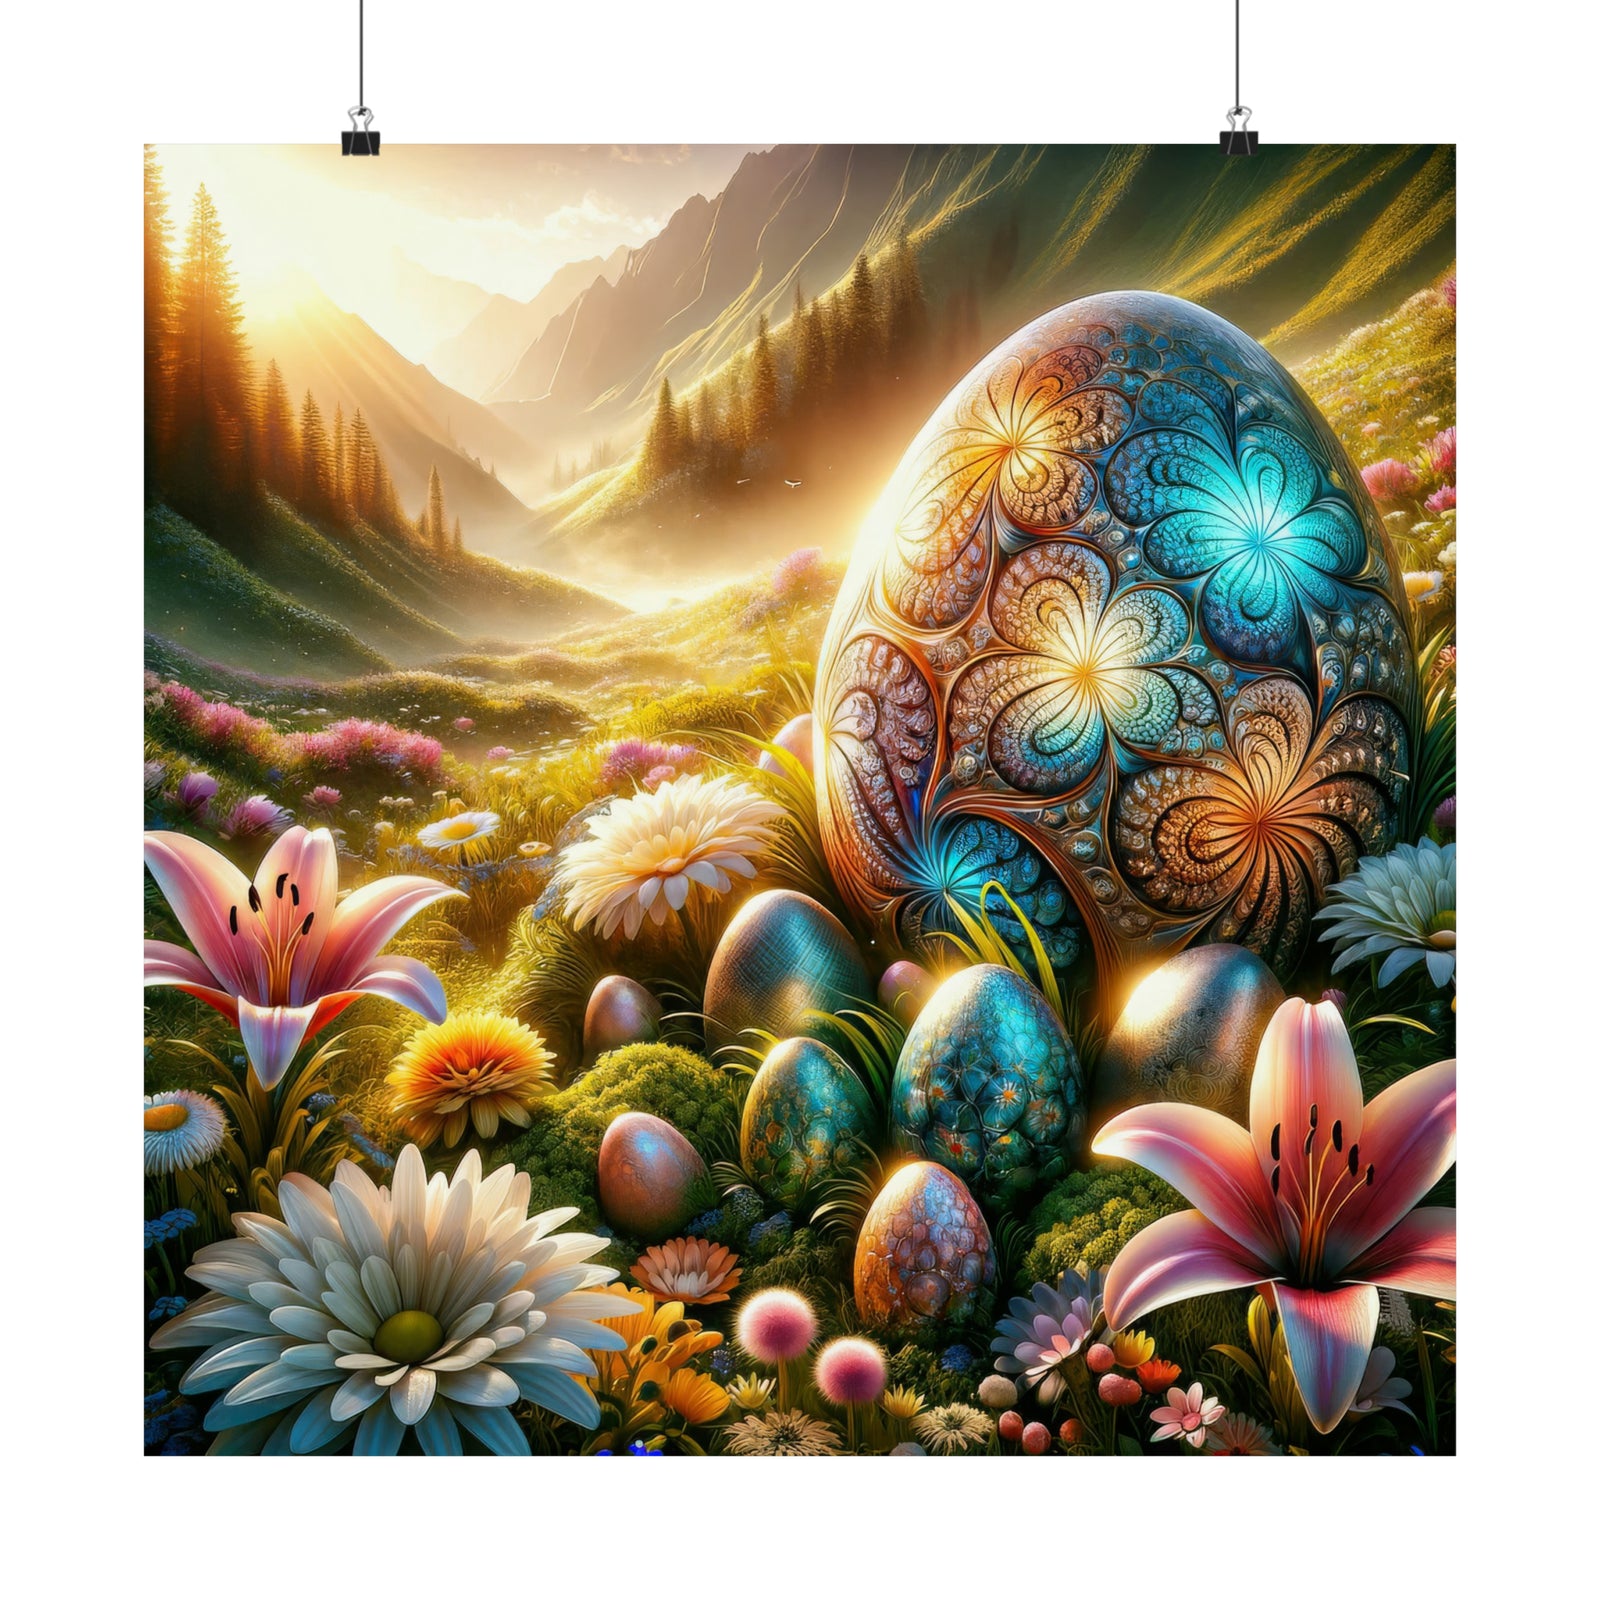 The Gilded Eggs of the Mountain Meadow Poster